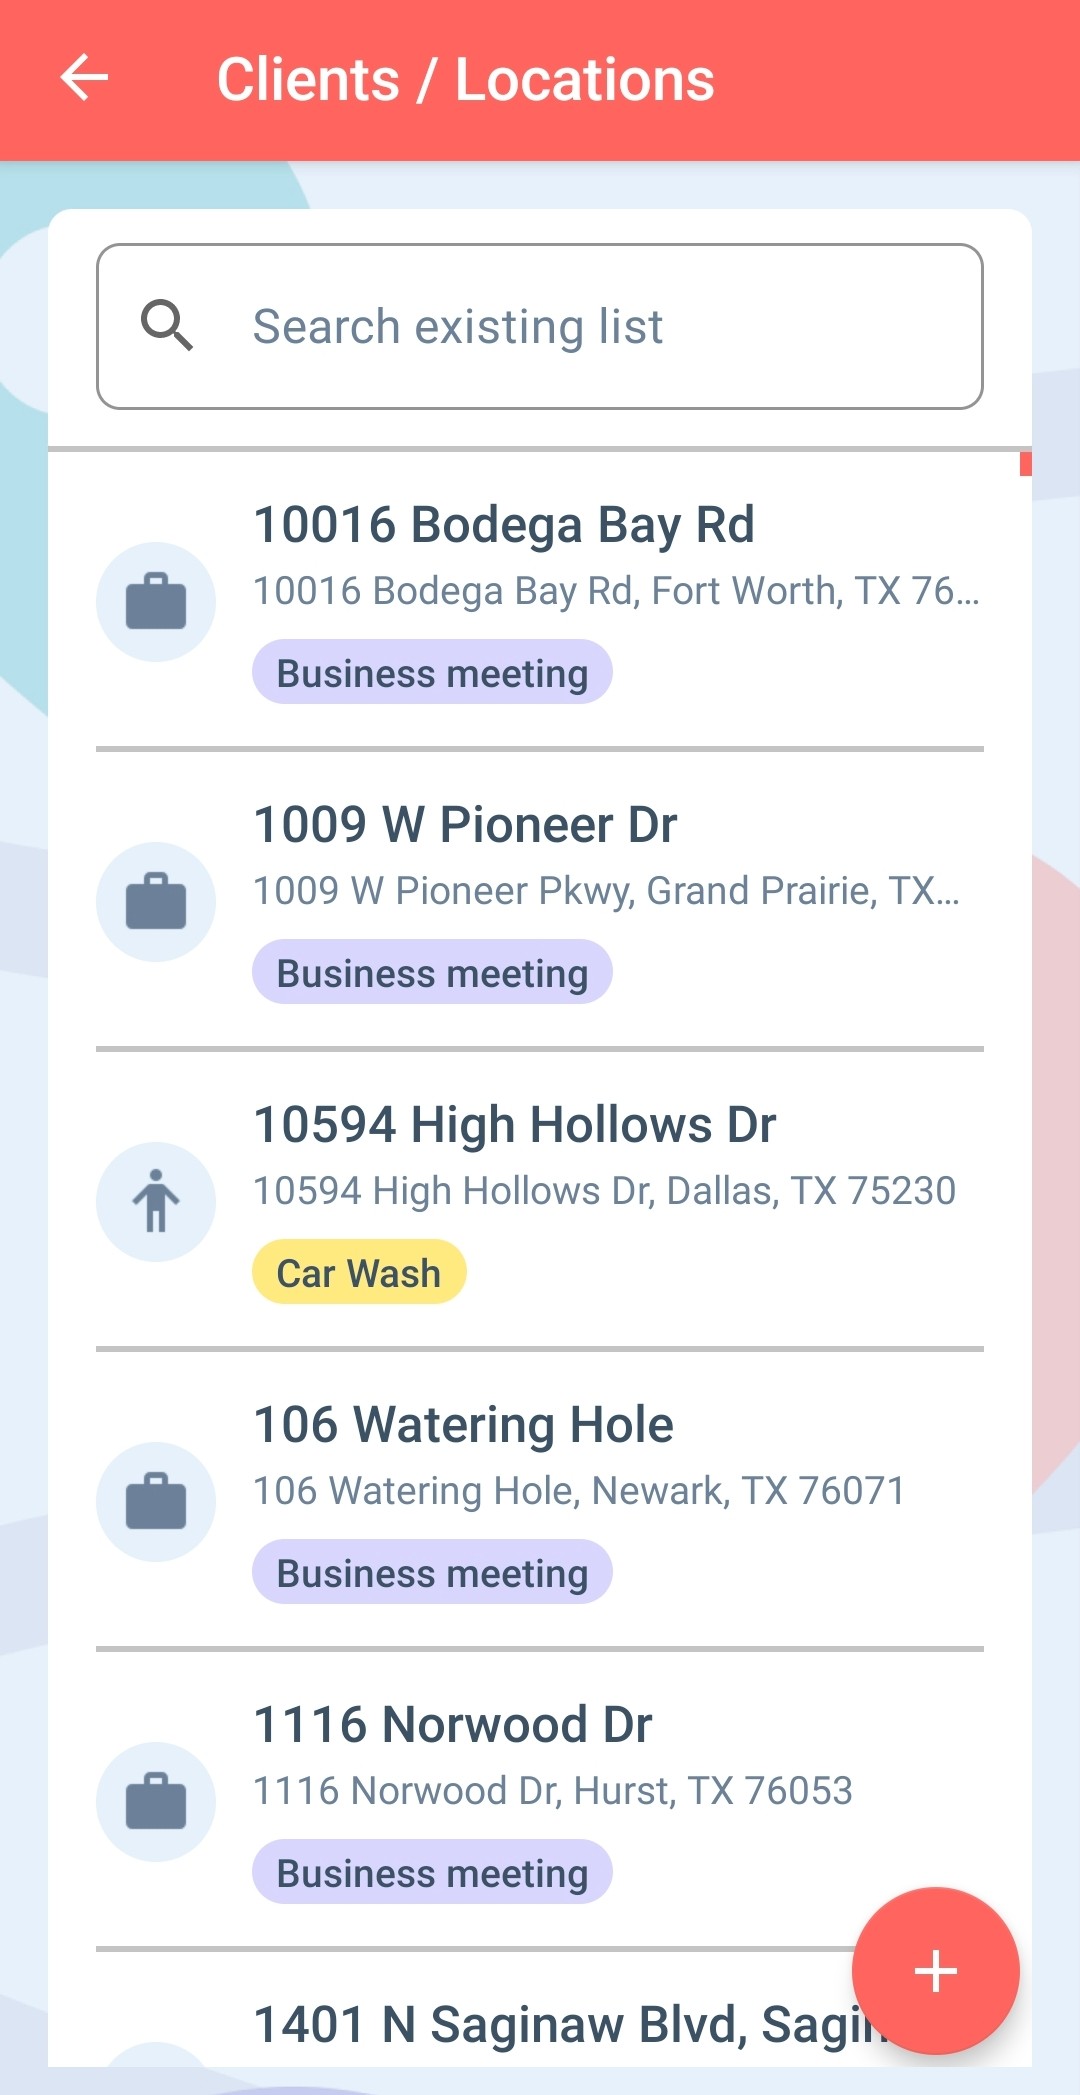 view and edit clients and locations in mileagewise app